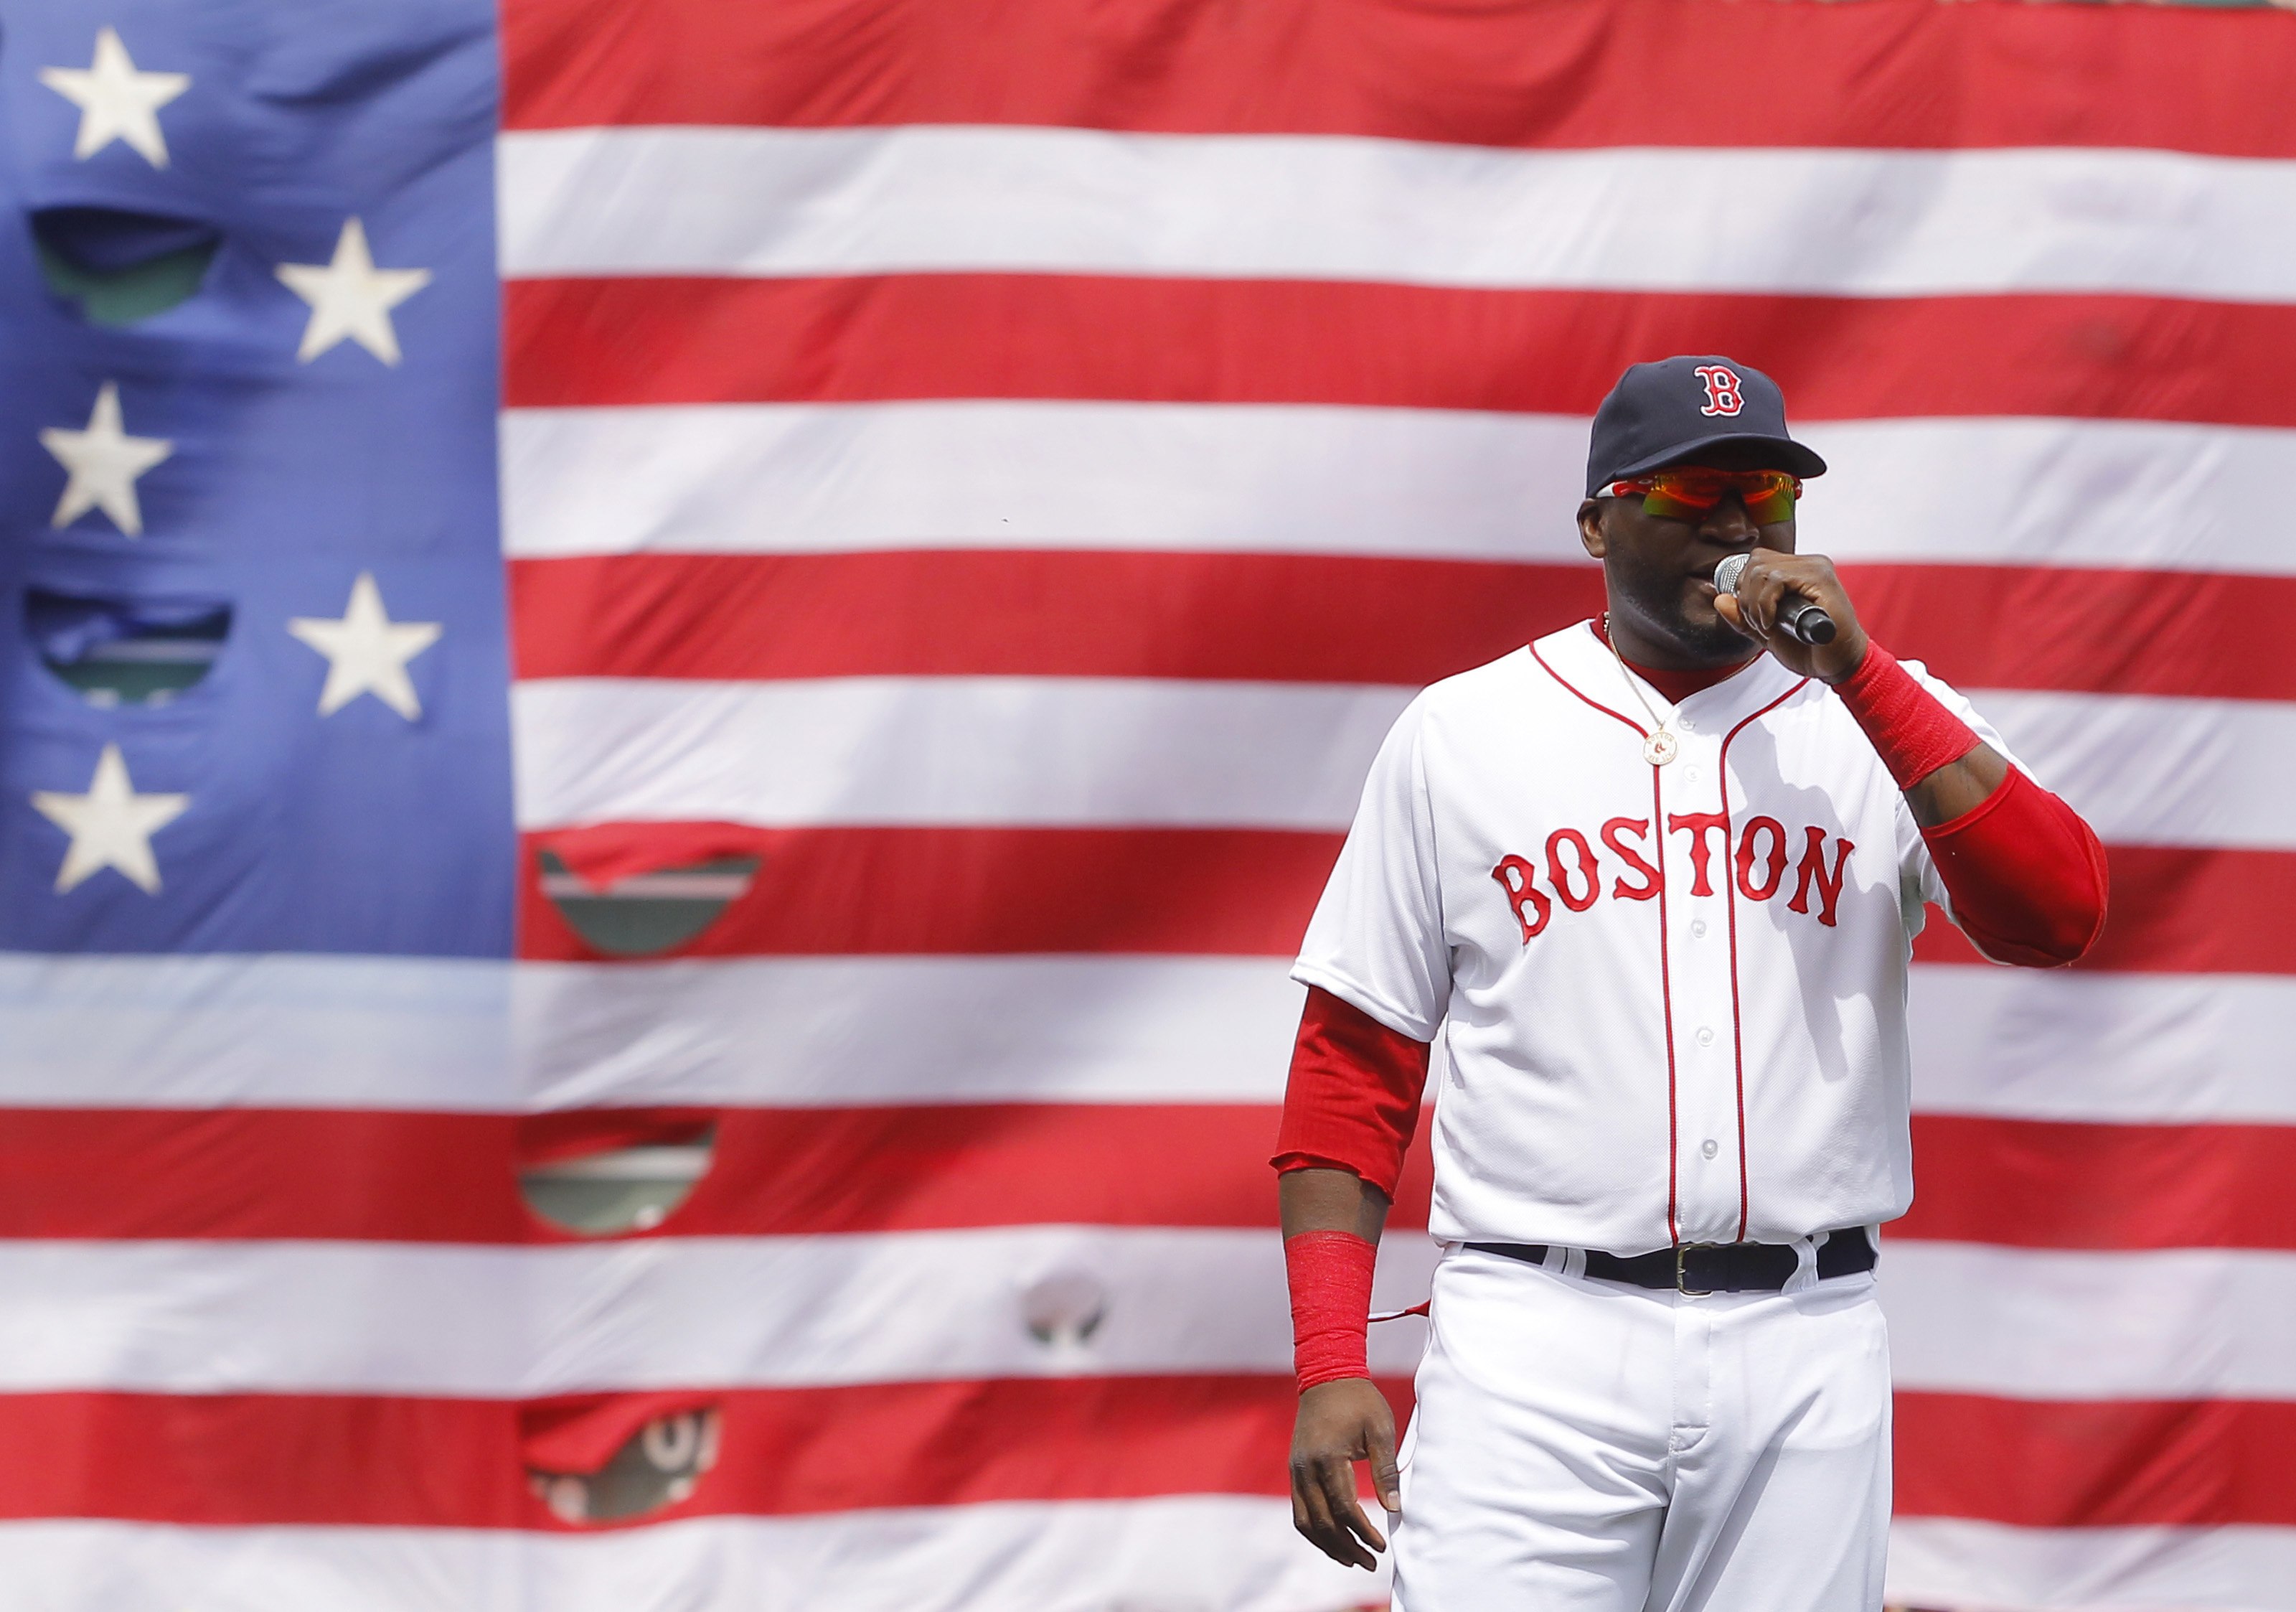 Red Sox Hang 'Boston Strong' No. 617 Jersey in Dugout During